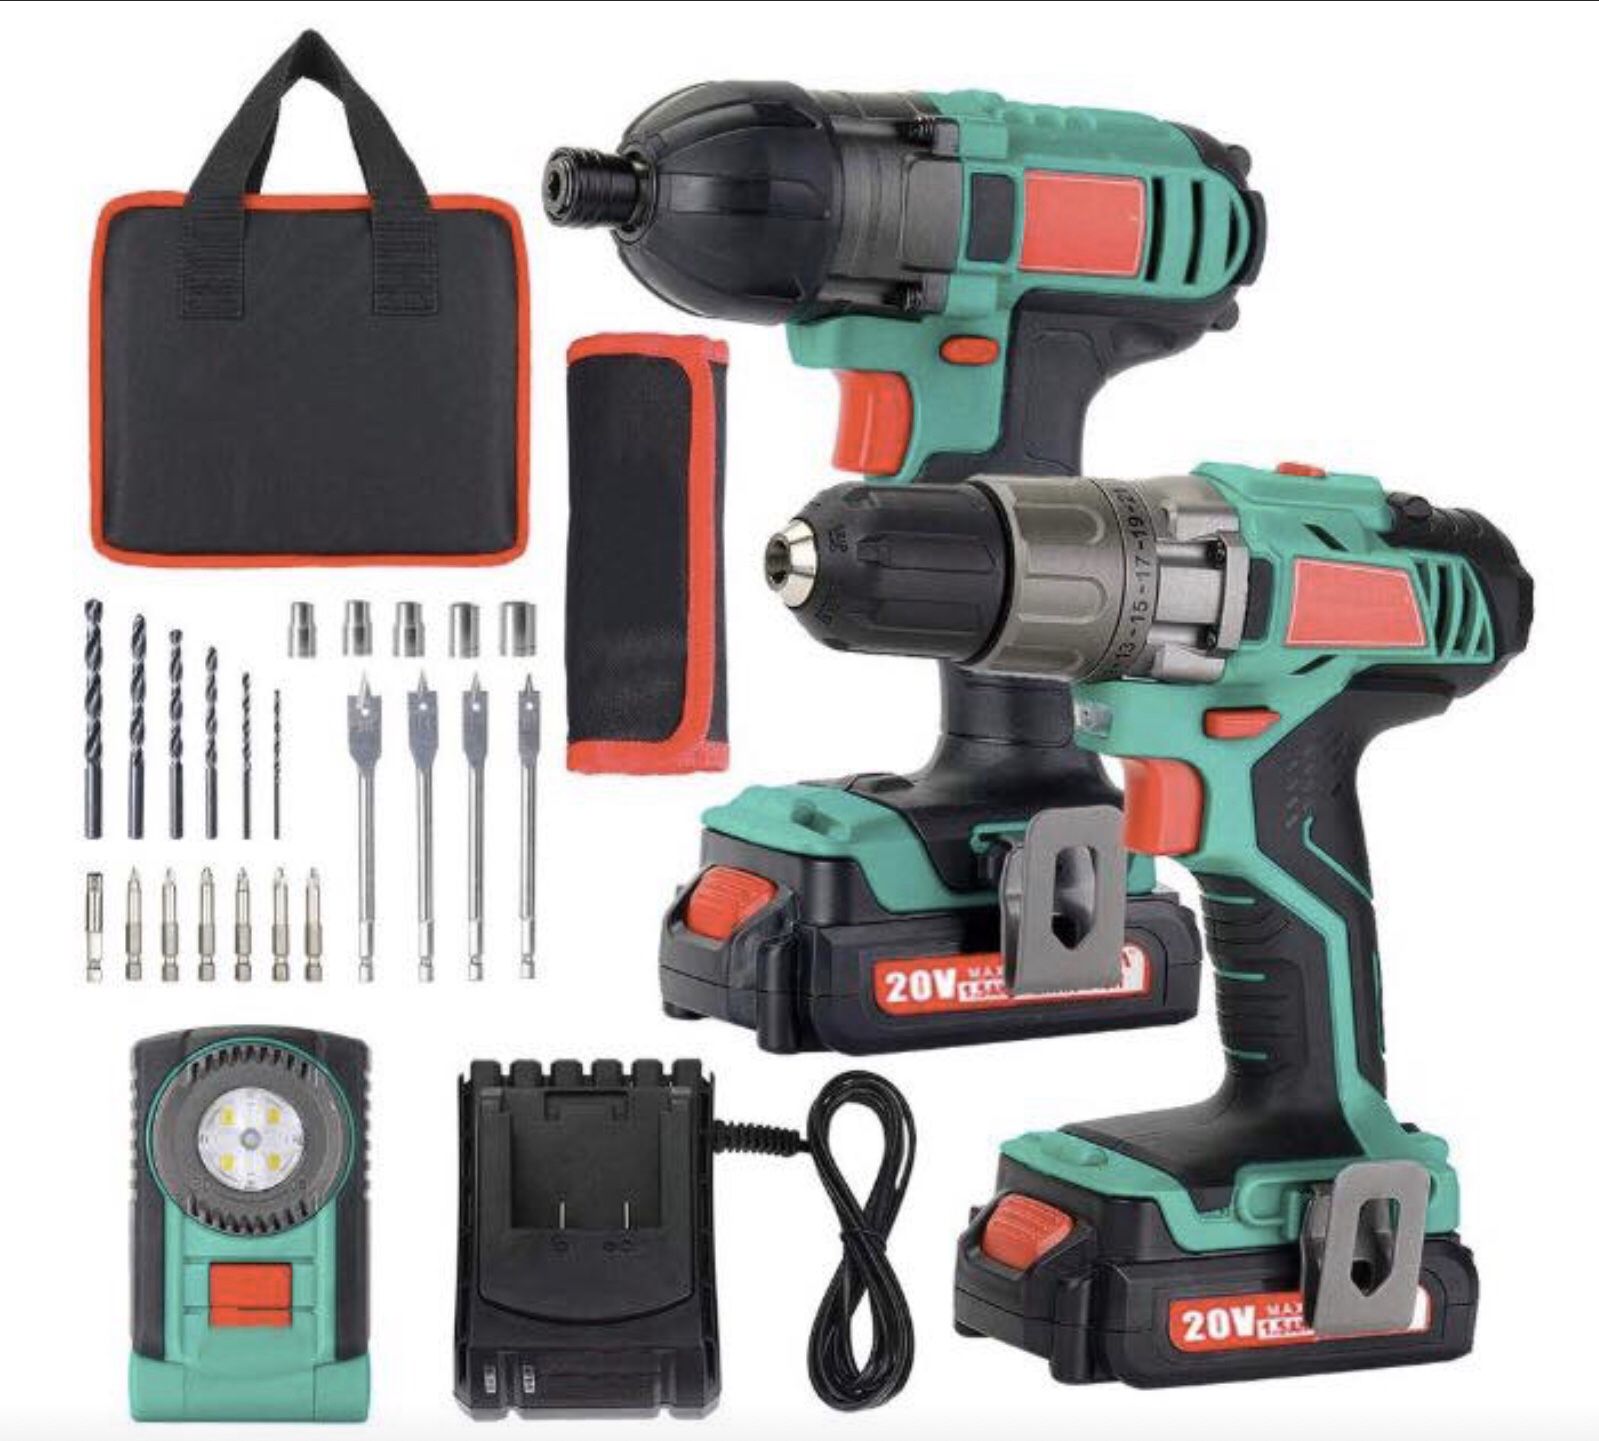 Brand New in Box Cordless Drill Driver 18V 35Nm and Impact Driver Drill Combo Kit, 2x1.5Ah Batteries,1H Fast Charging,300/150lm LED Flashlight,22PCS